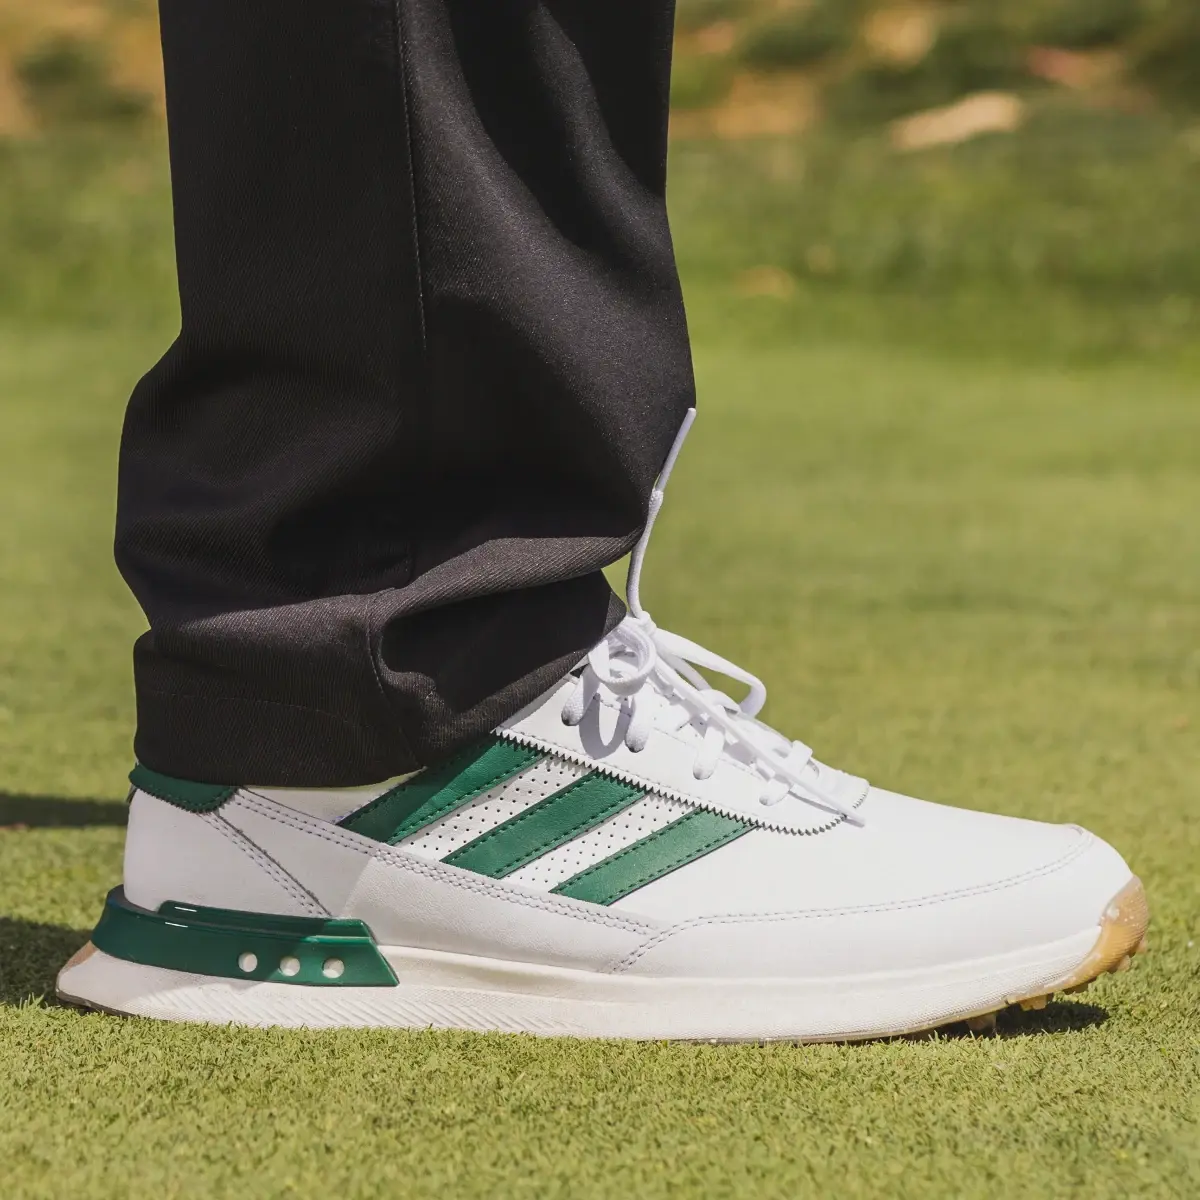 Adidas S2G Spikeless Leather 24 Golf Shoes. 3